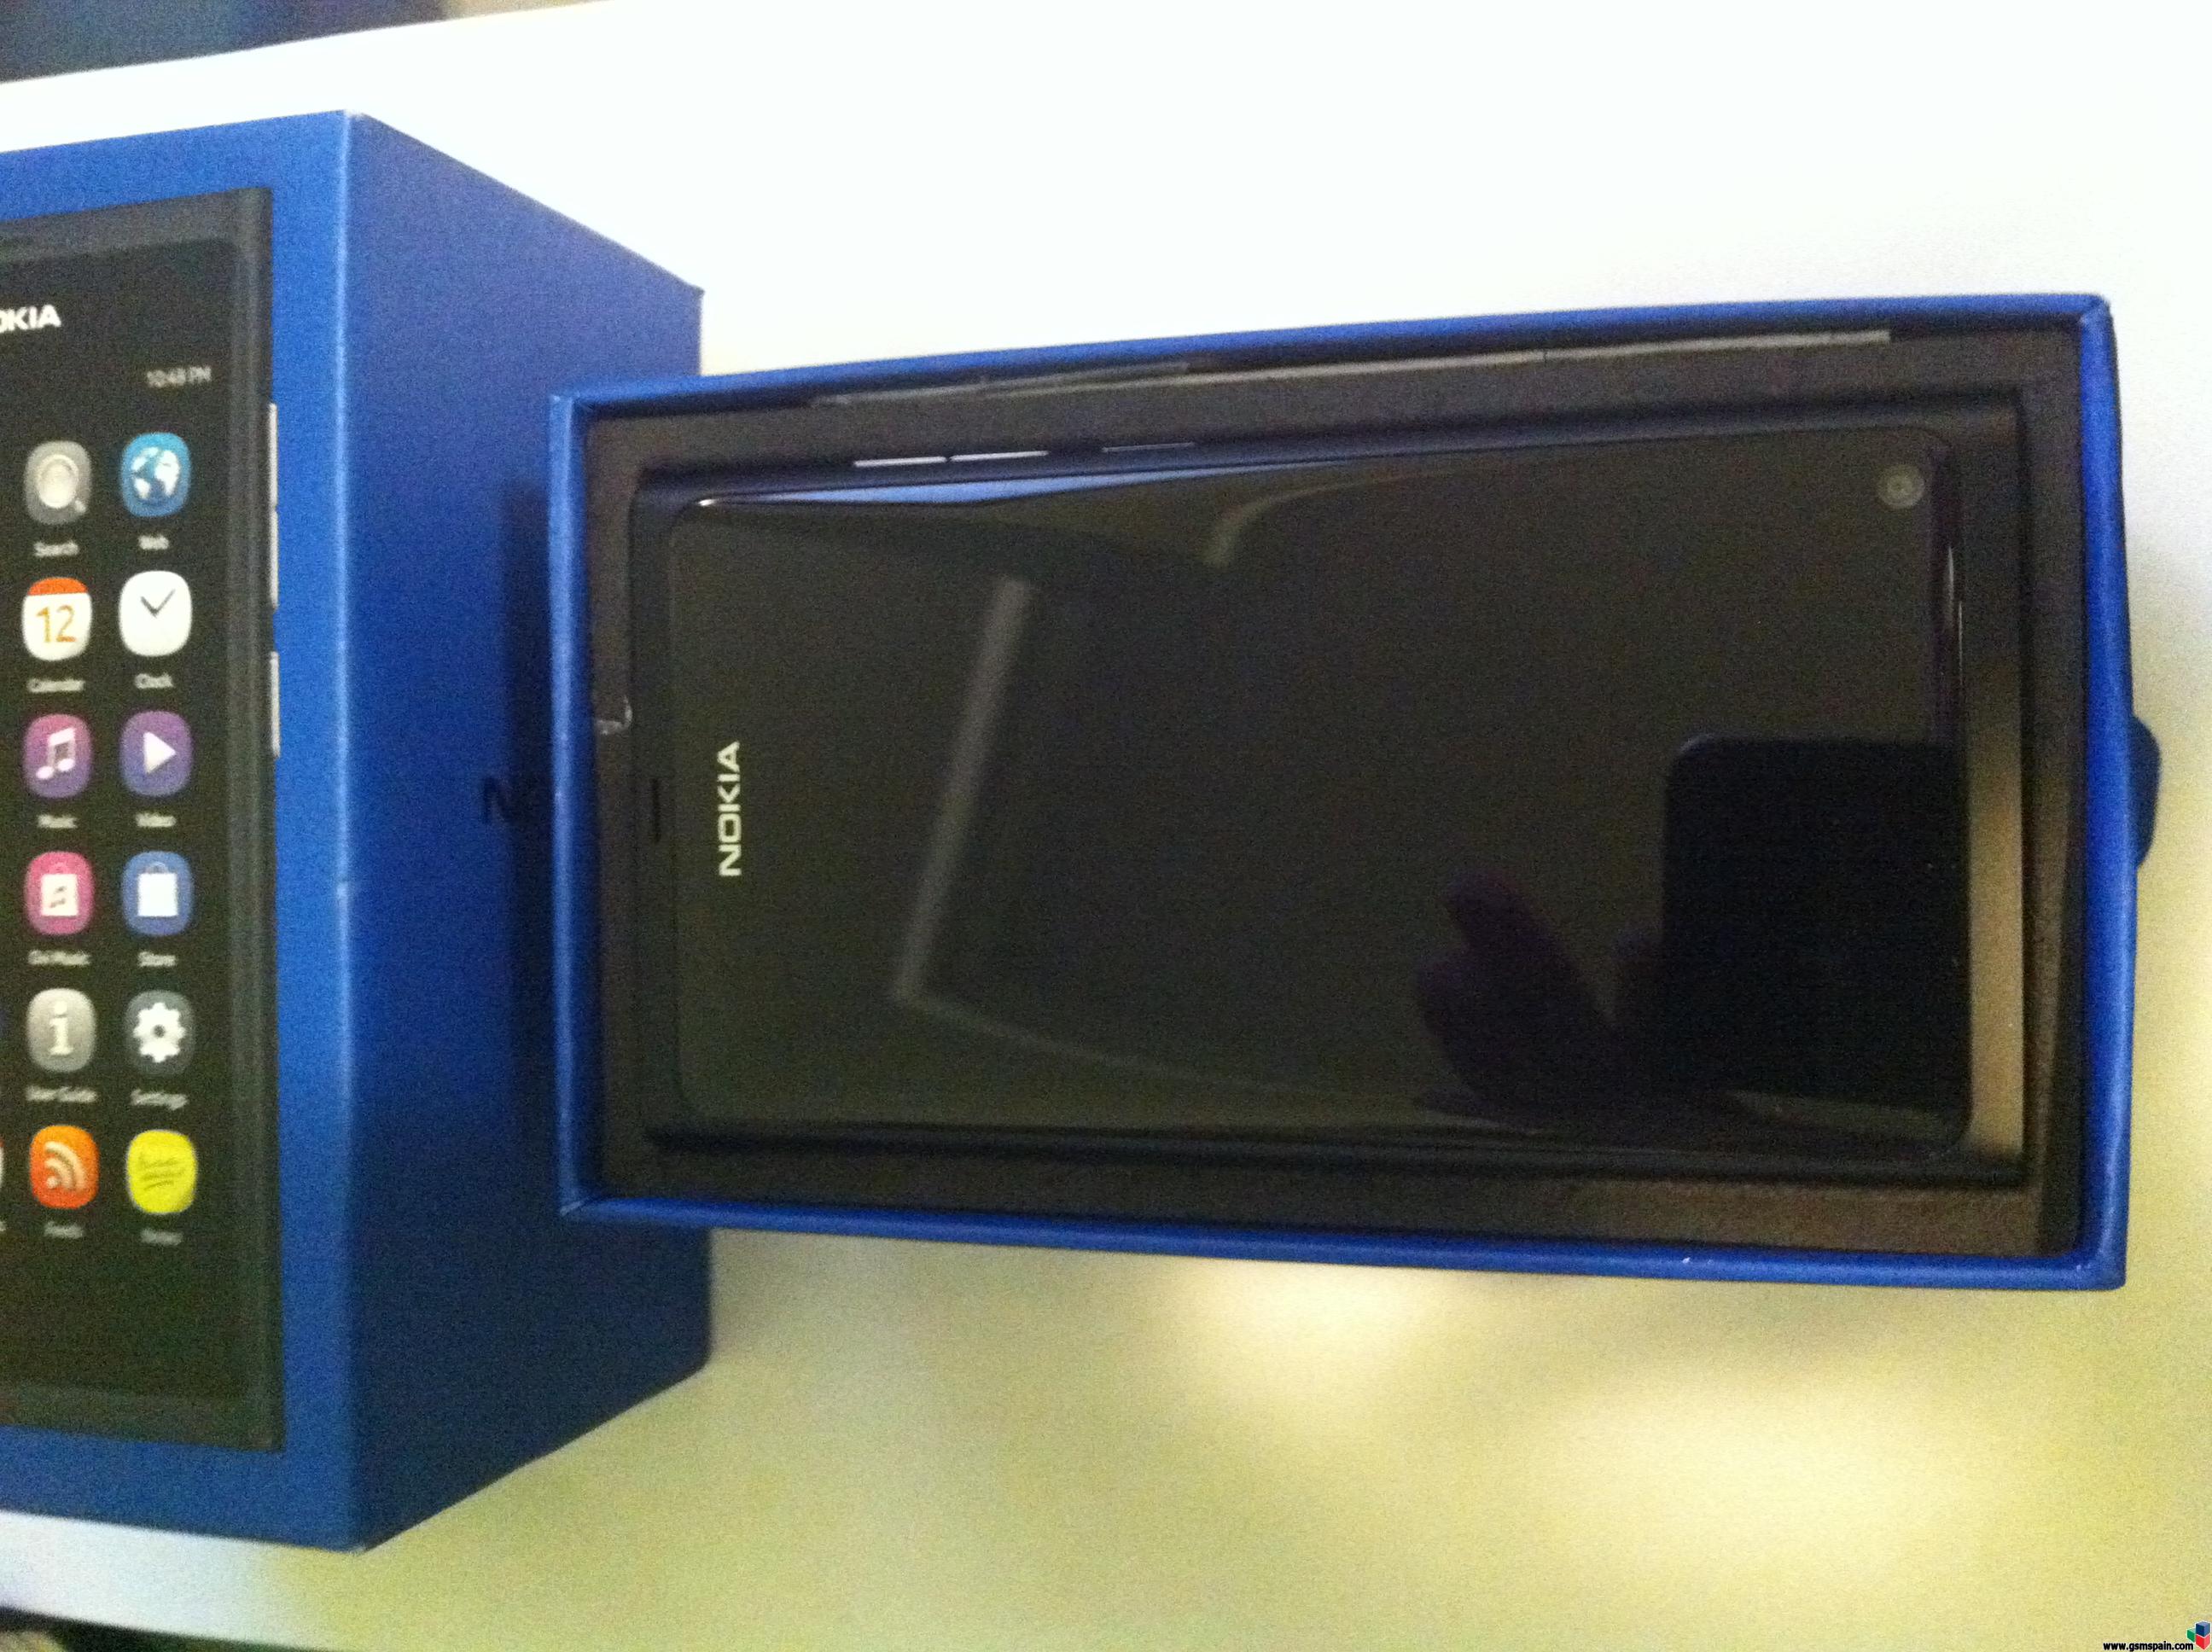 [REVIEW] Foto review Nokia N9